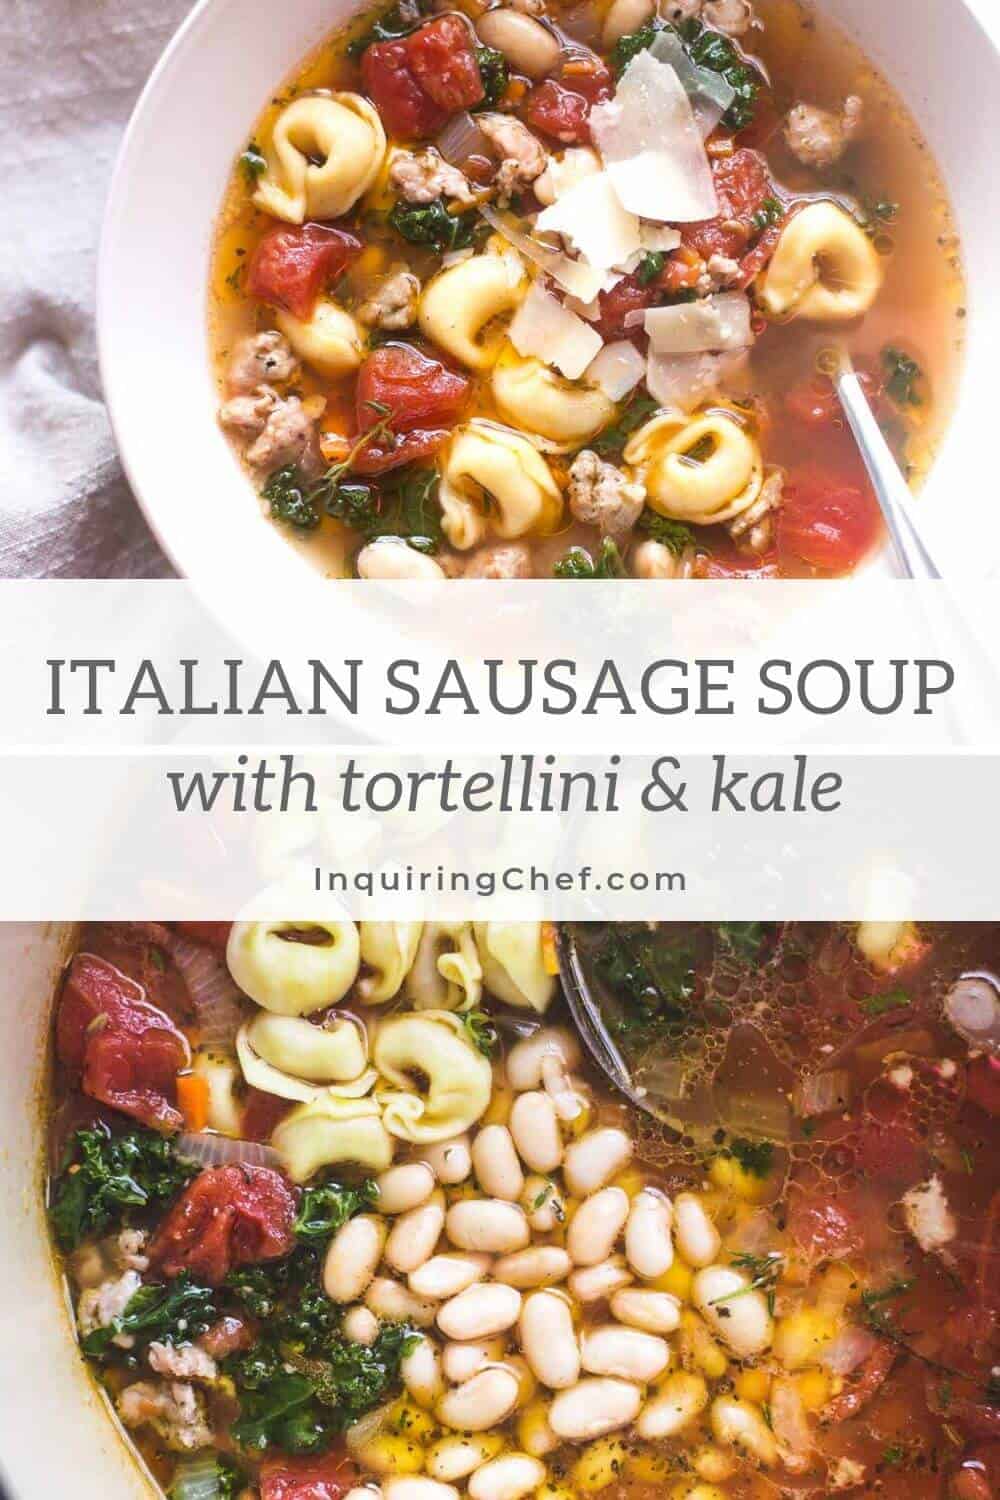 Italian Sausage Soup with Tortellini and Kale